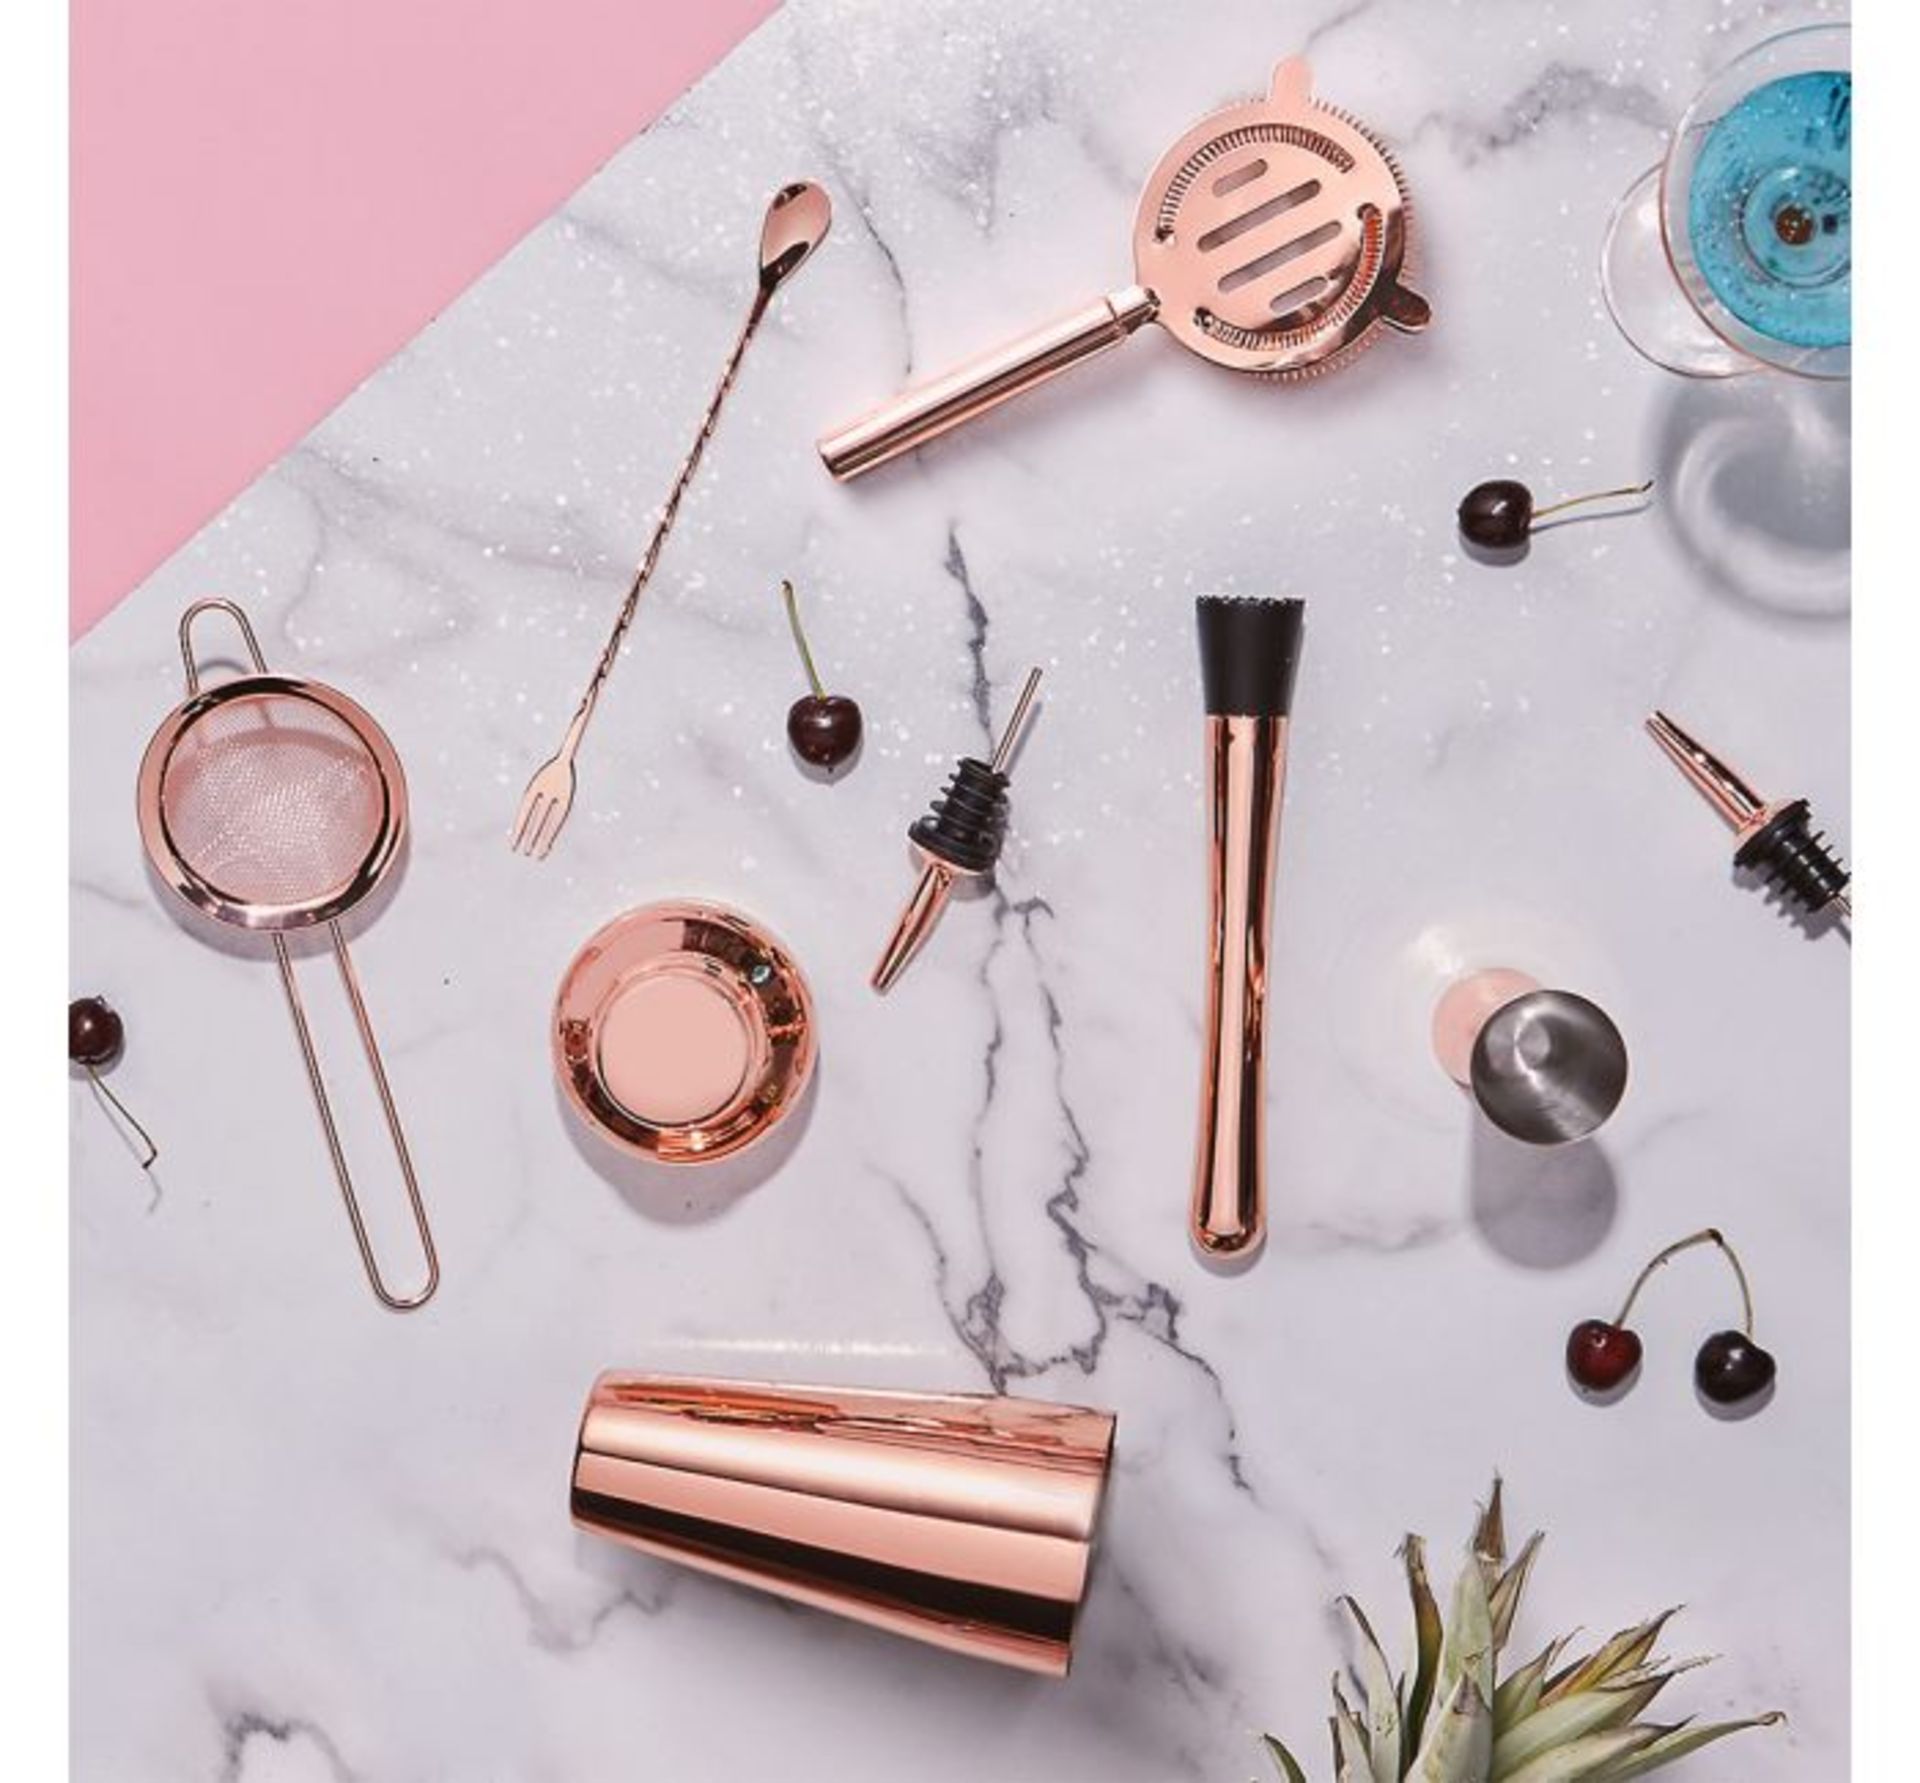 (X16) 1x Rose Gold Parisian Cocktail Set. Set includes a muddler, double-ended bar spoon/ fork, - Image 2 of 4